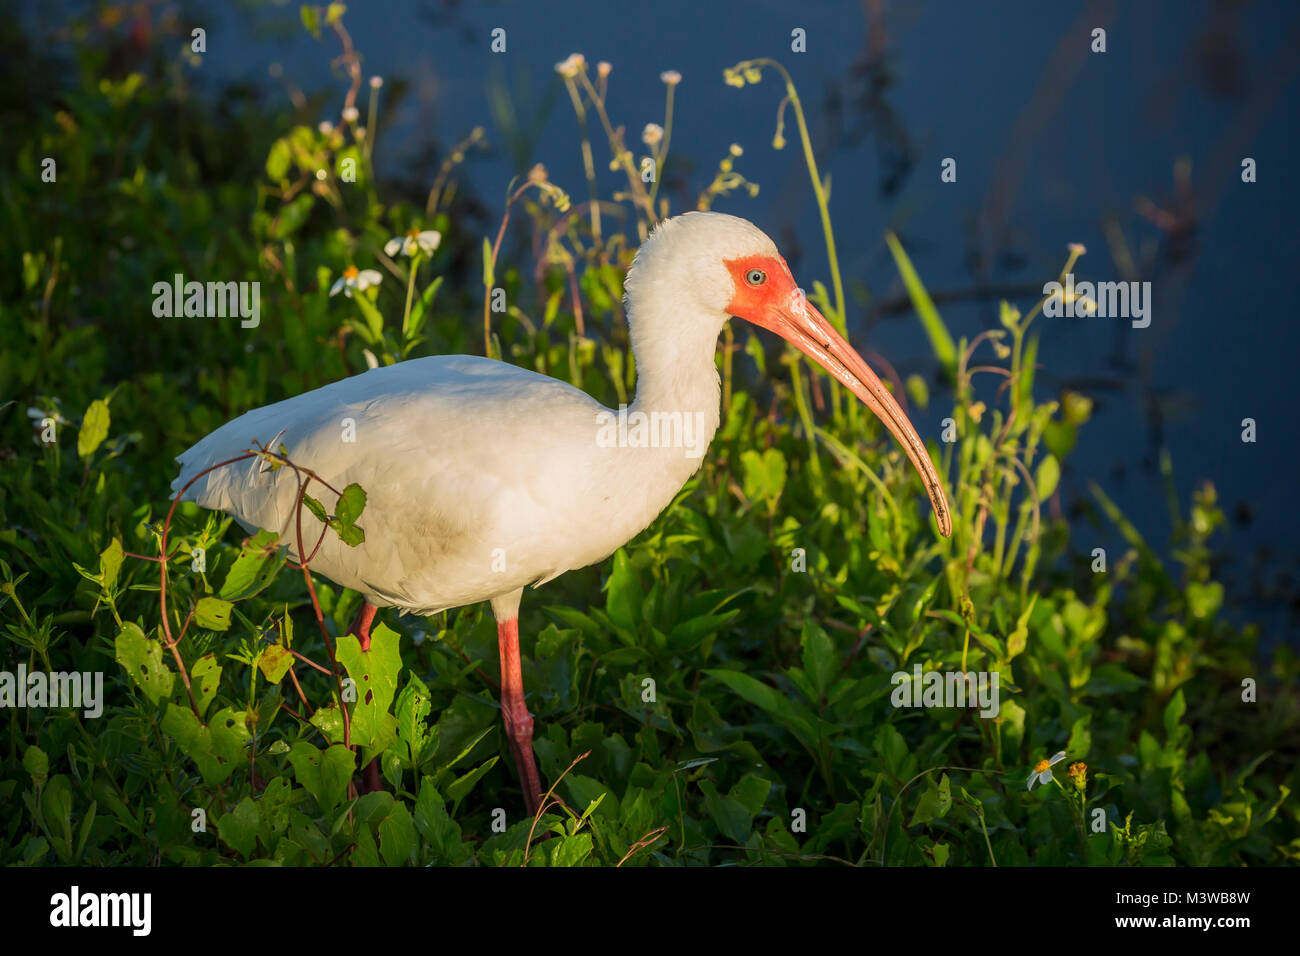 White Ibis (Eudocimus albus) adult searching for food in Everglades National Park, Florida Stock Photo